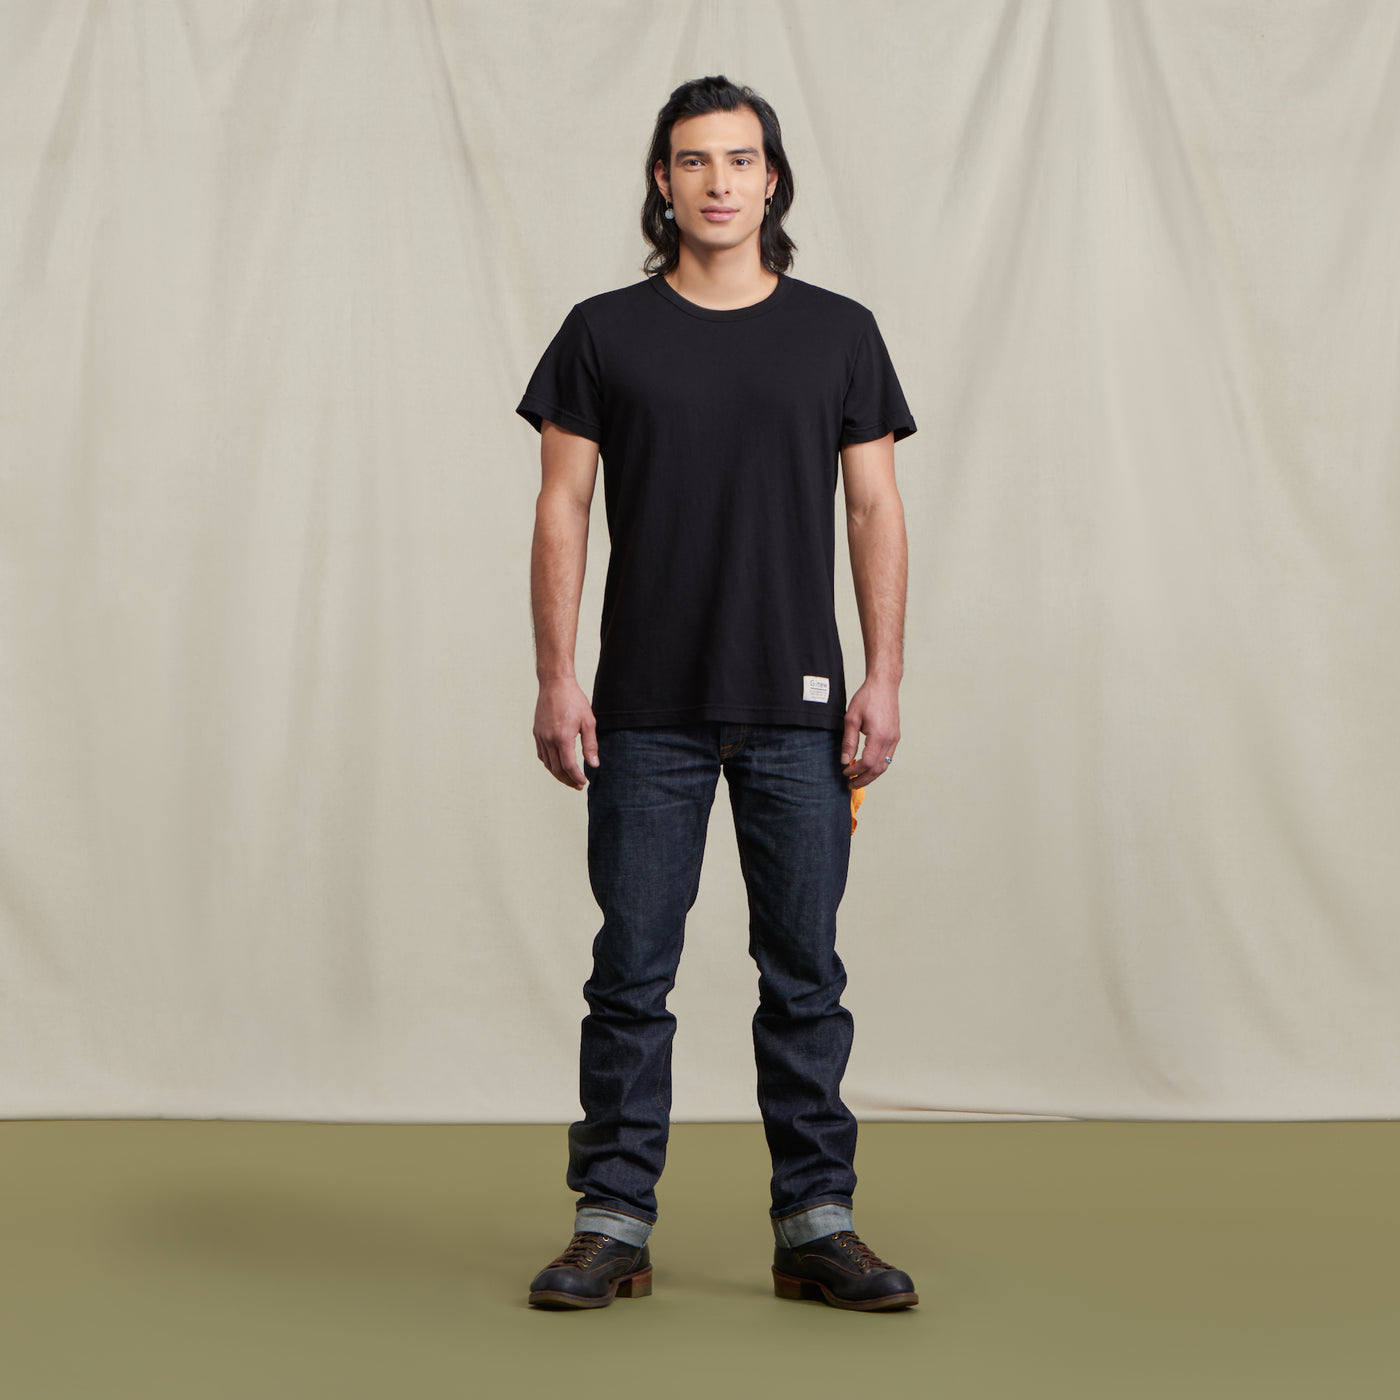 The picture is of a male model wearing the Crew Tee Jet Black with jeans and brown boots. He is posed in front of a neutral background.